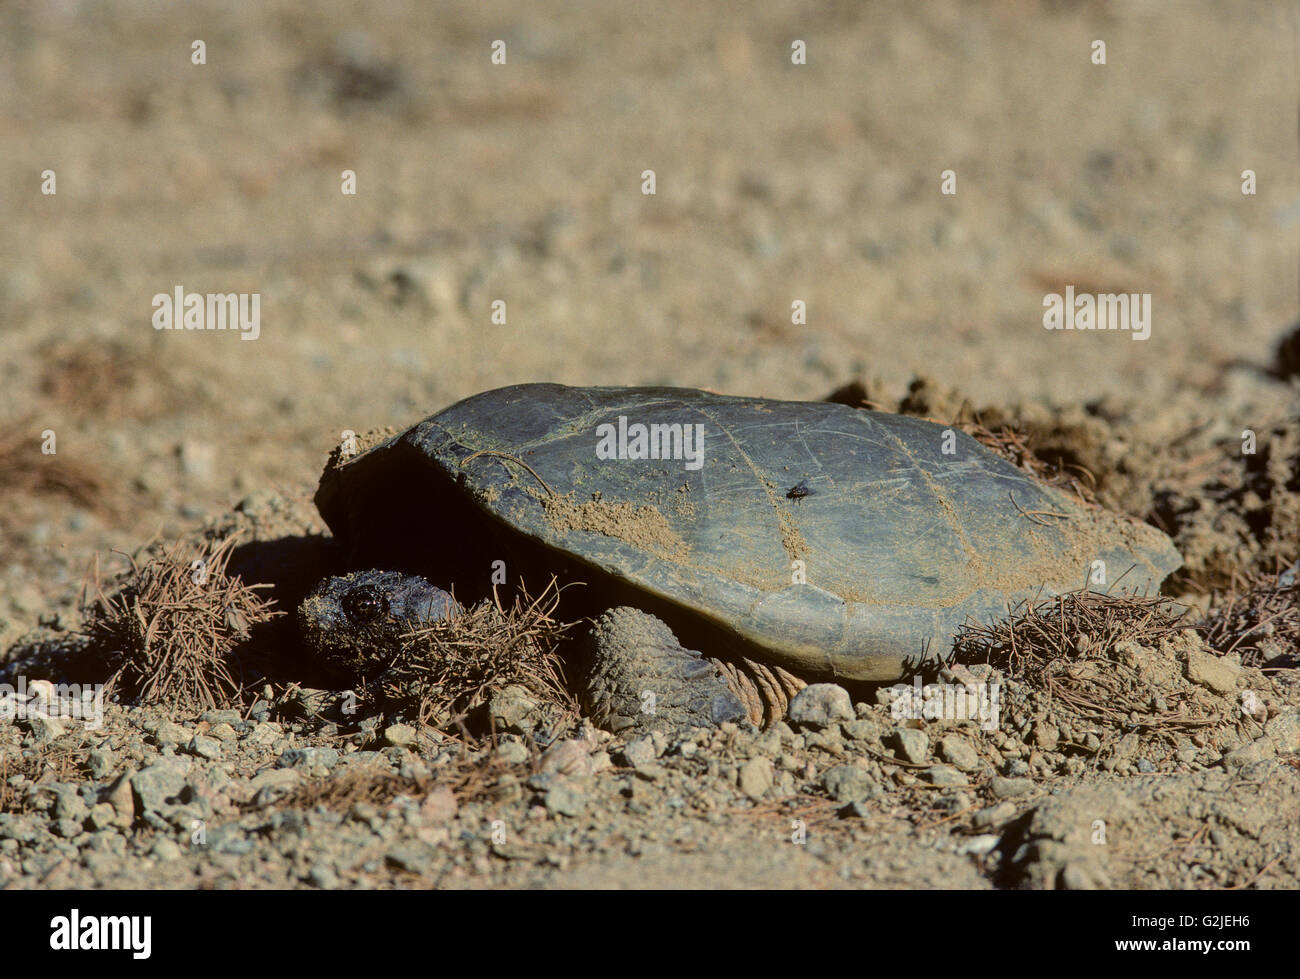 Snapping (Chelydra serpentina) Turtle laying eggs in Algonquin Provincial Park, Central Ontario, Canada. Stock Photo